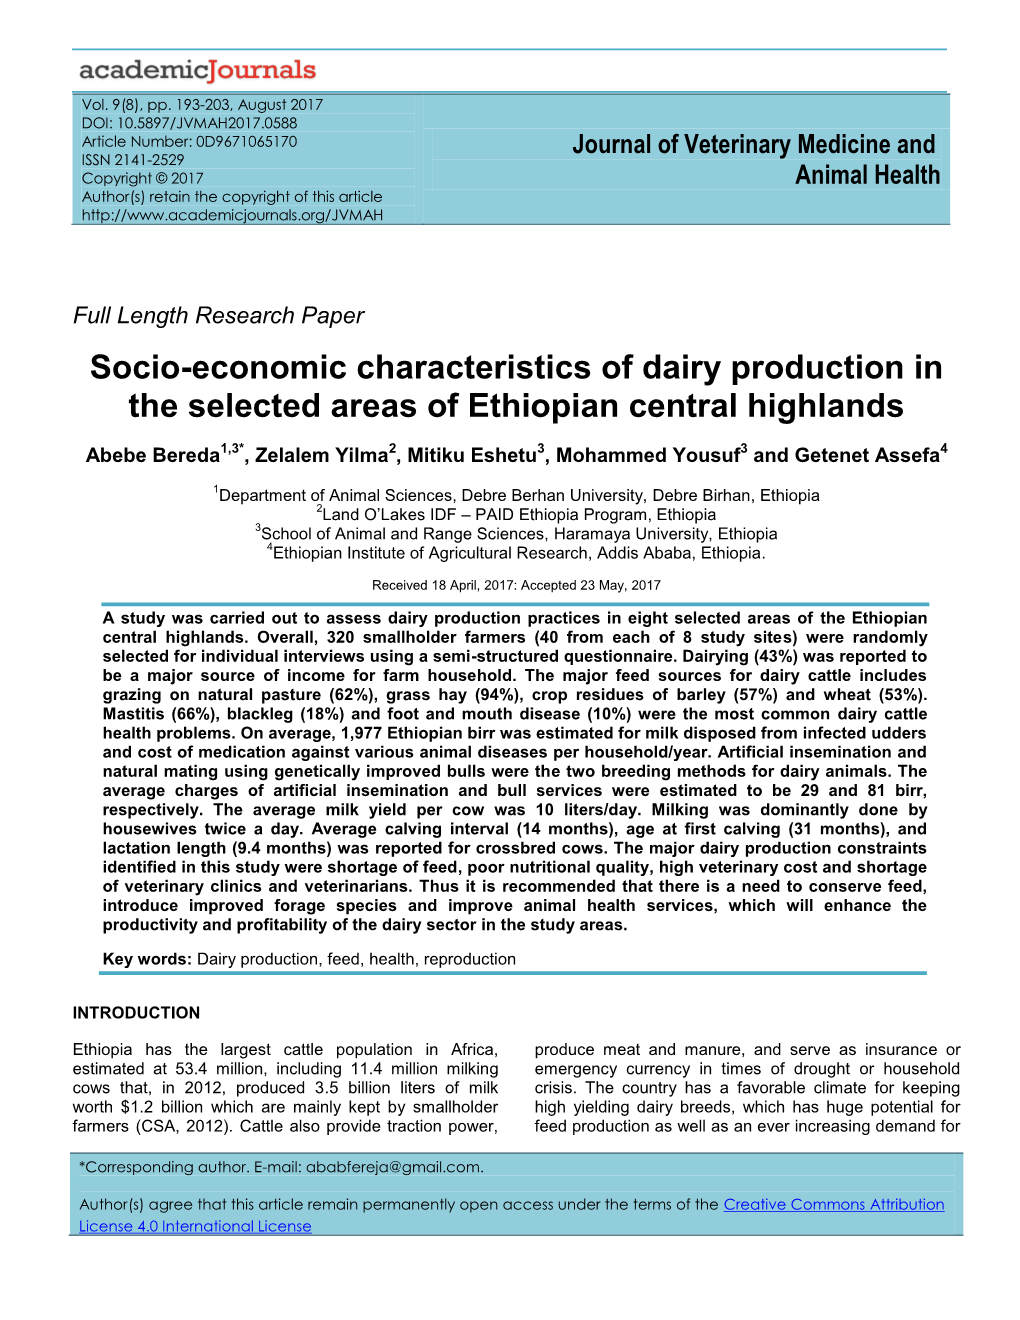 Socio-Economic Characteristics of Dairy Production in the Selected Areas of Ethiopian Central Highlands